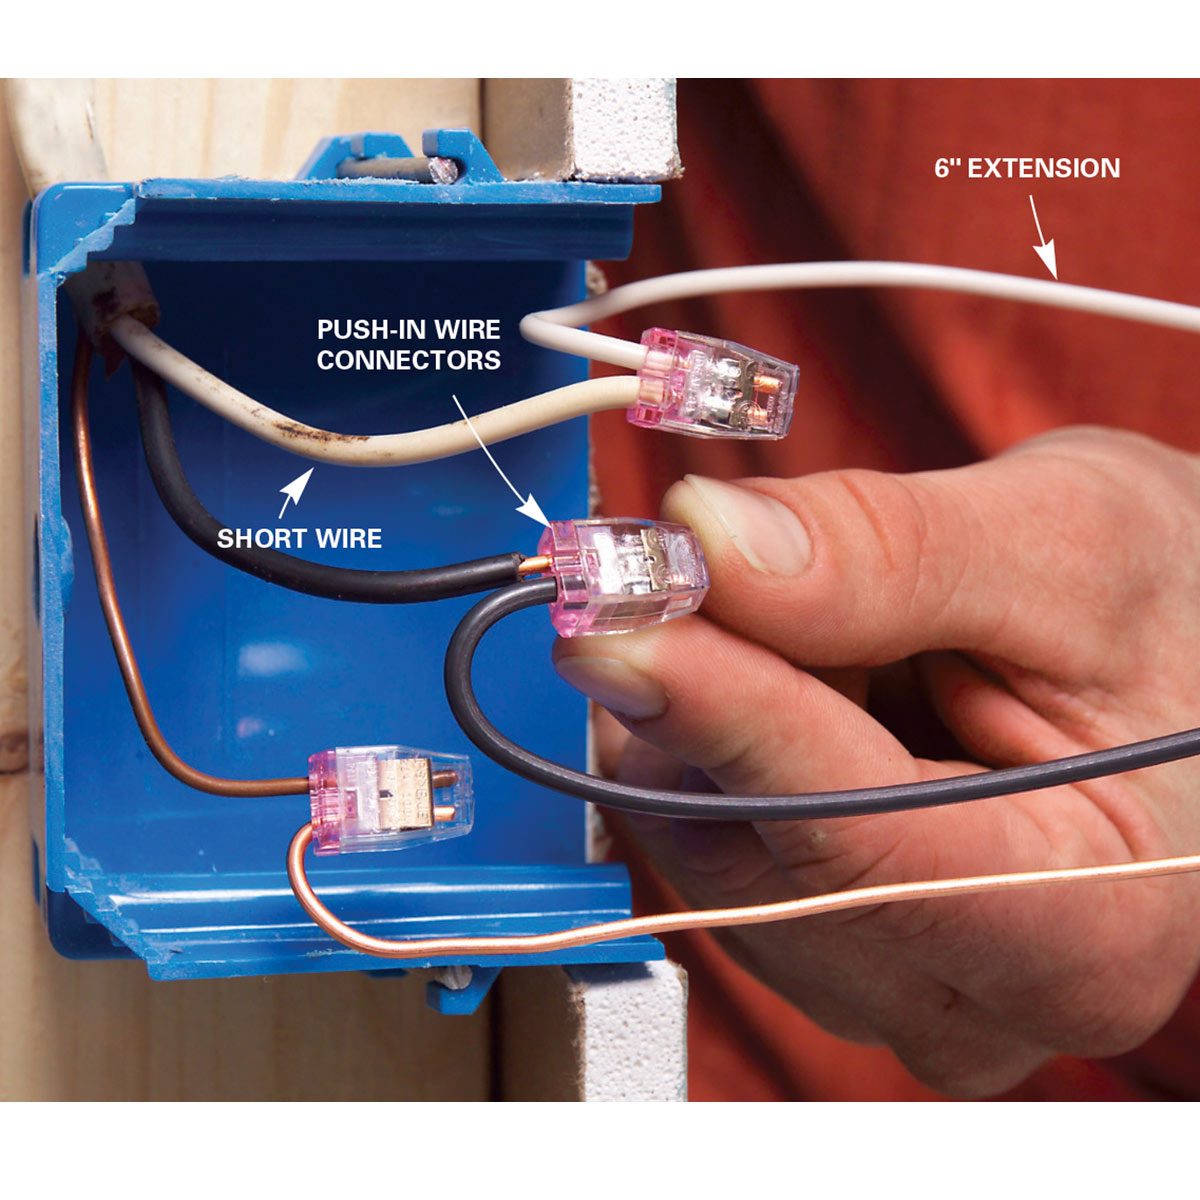 Wiring A Switch And Outlet The Safe And Easy Way Family Handyman